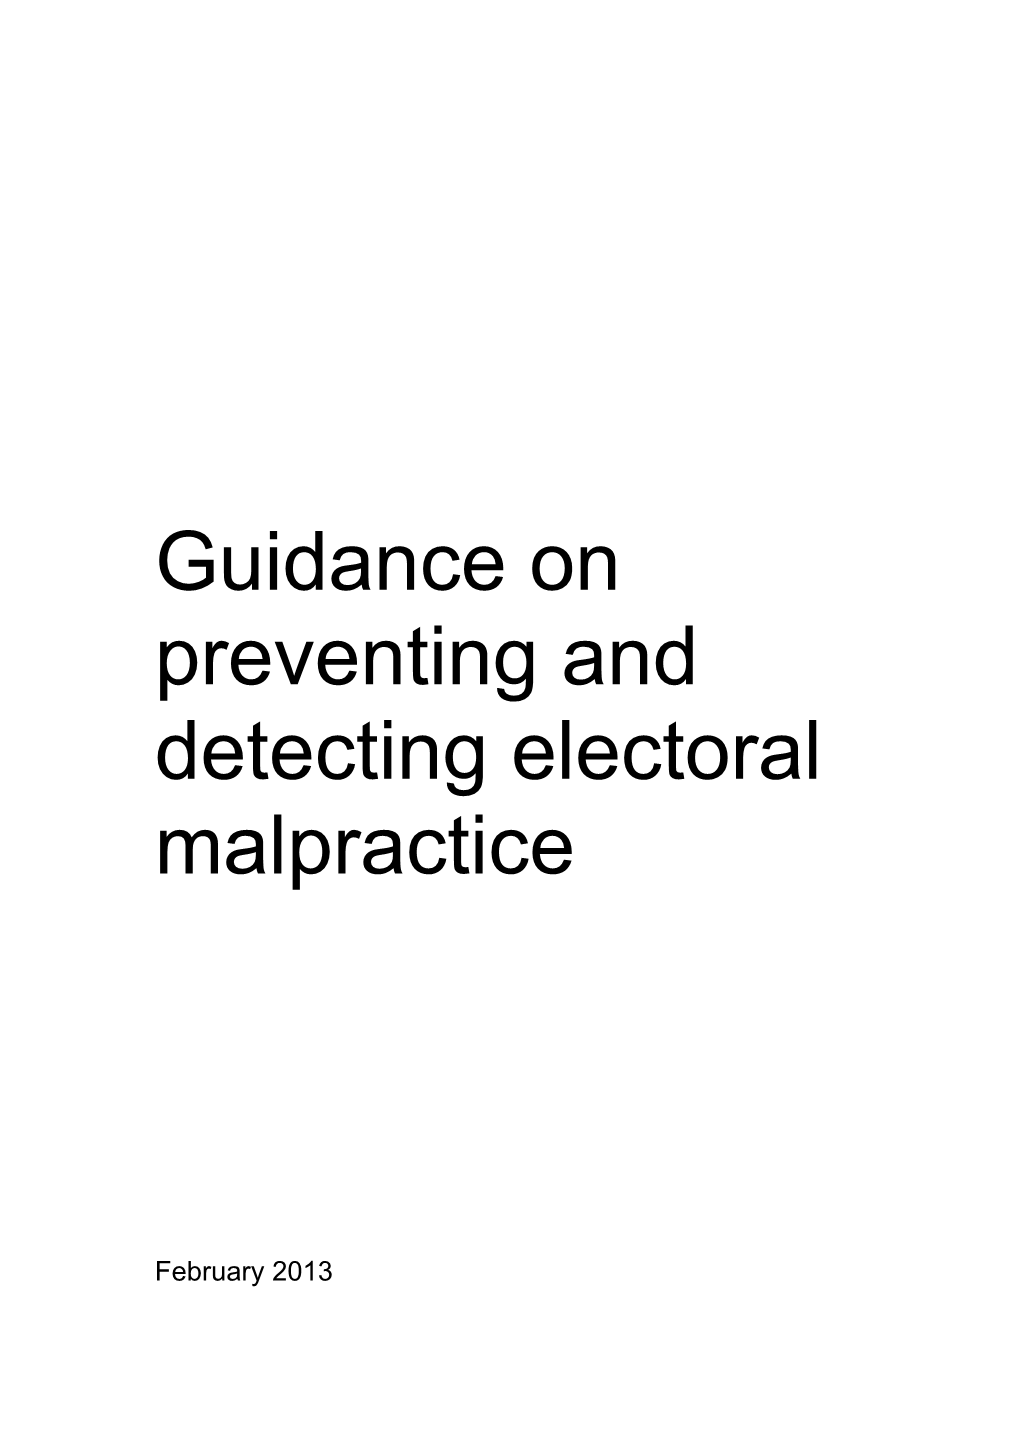 Guidance on Preventing and Detecting Electoral Malpractice